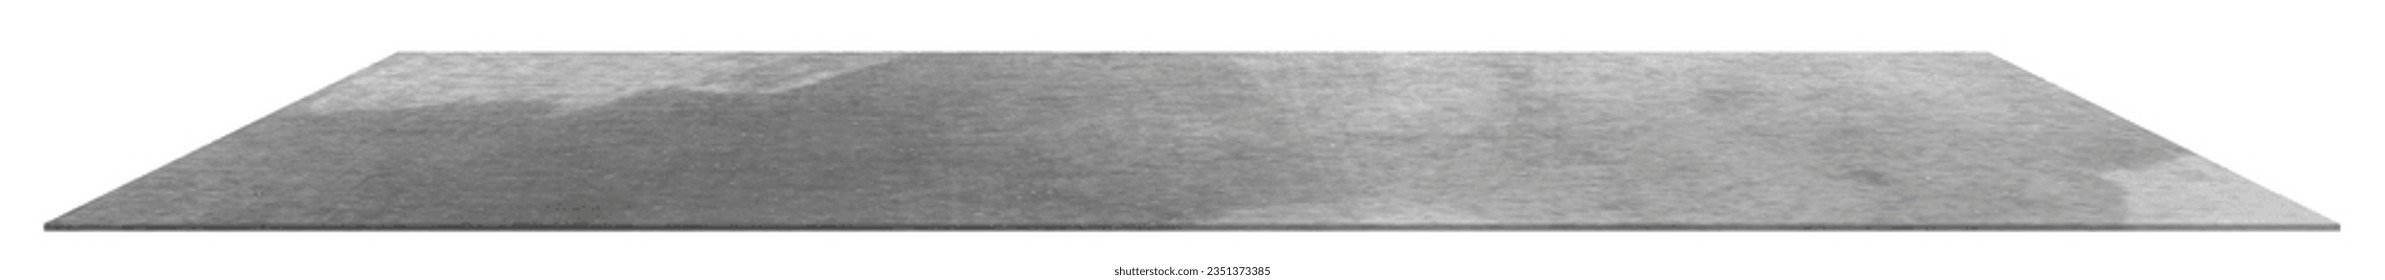 Grunge metal tabletop or Grey Steel rough surface shelf isolated on white backgroud,Perspective old metal counter, Floor plank template mock up for display products presentation